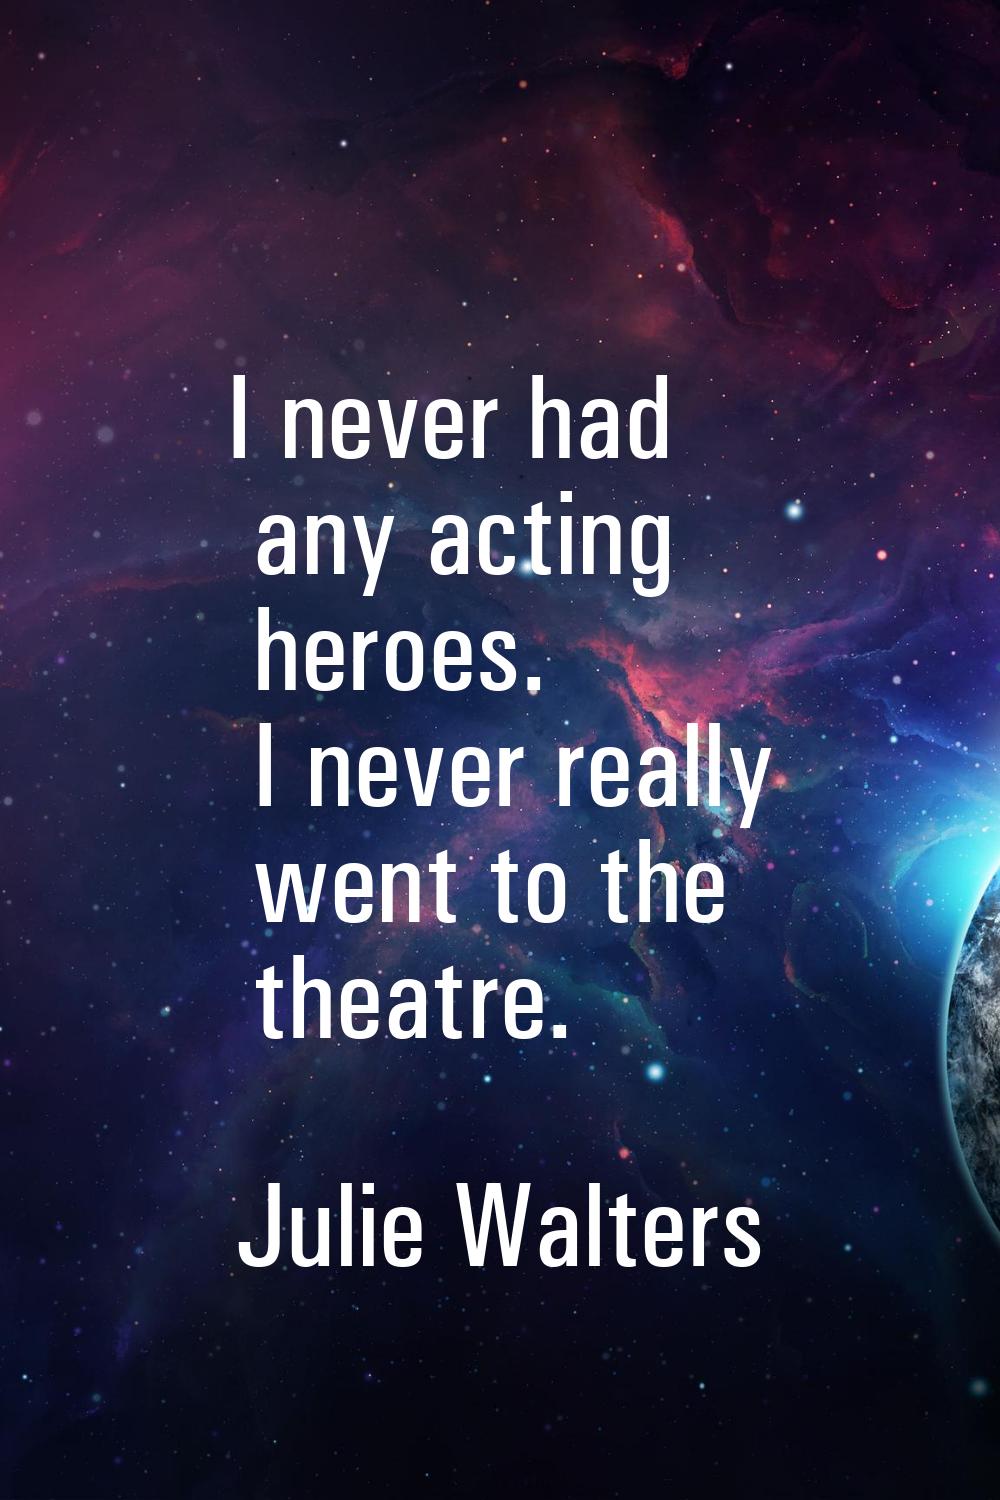 I never had any acting heroes. I never really went to the theatre.